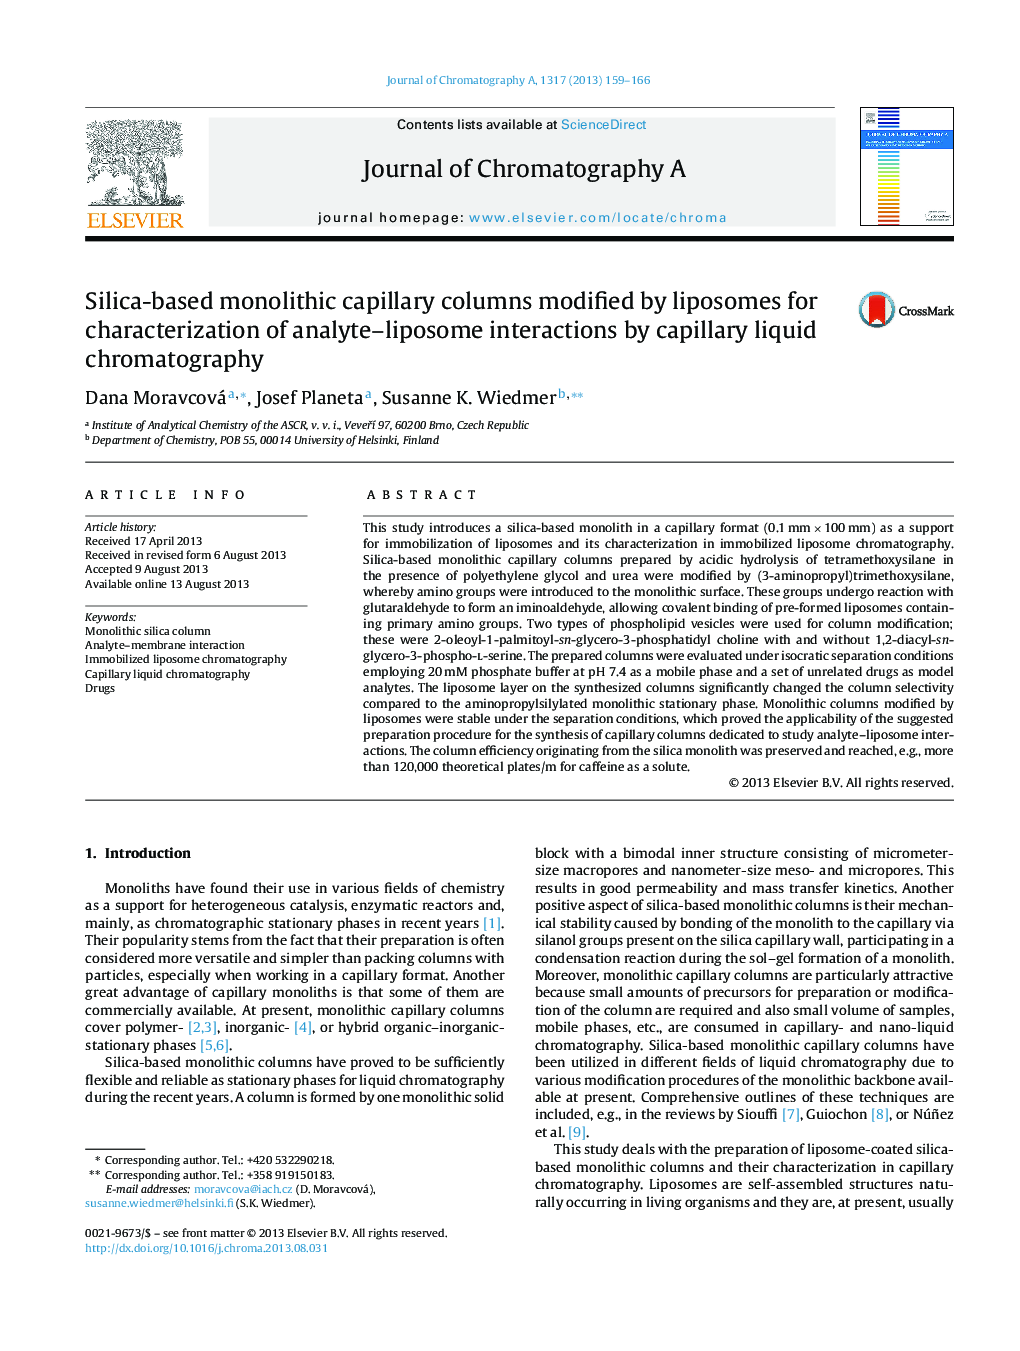 Silica-based monolithic capillary columns modified by liposomes for characterization of analyte–liposome interactions by capillary liquid chromatography